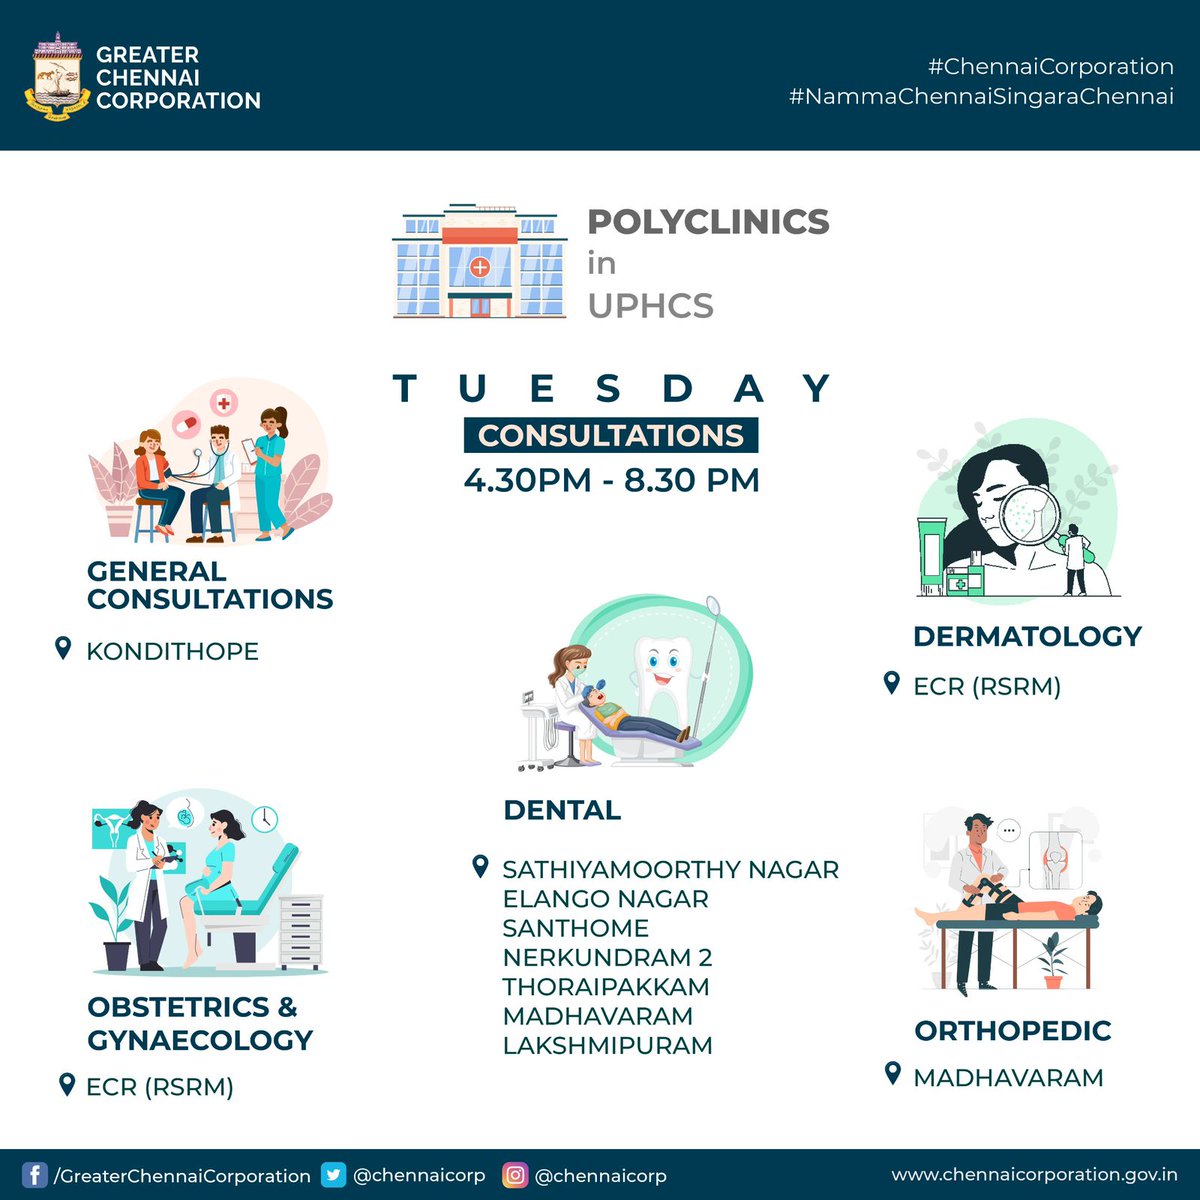 Hello #Chennaiites, Between 4:30 PM and 8:30 PM, the following GCC polyclinics provide a range of specialized consultations. #ChennaiCorporation #HeretoServe